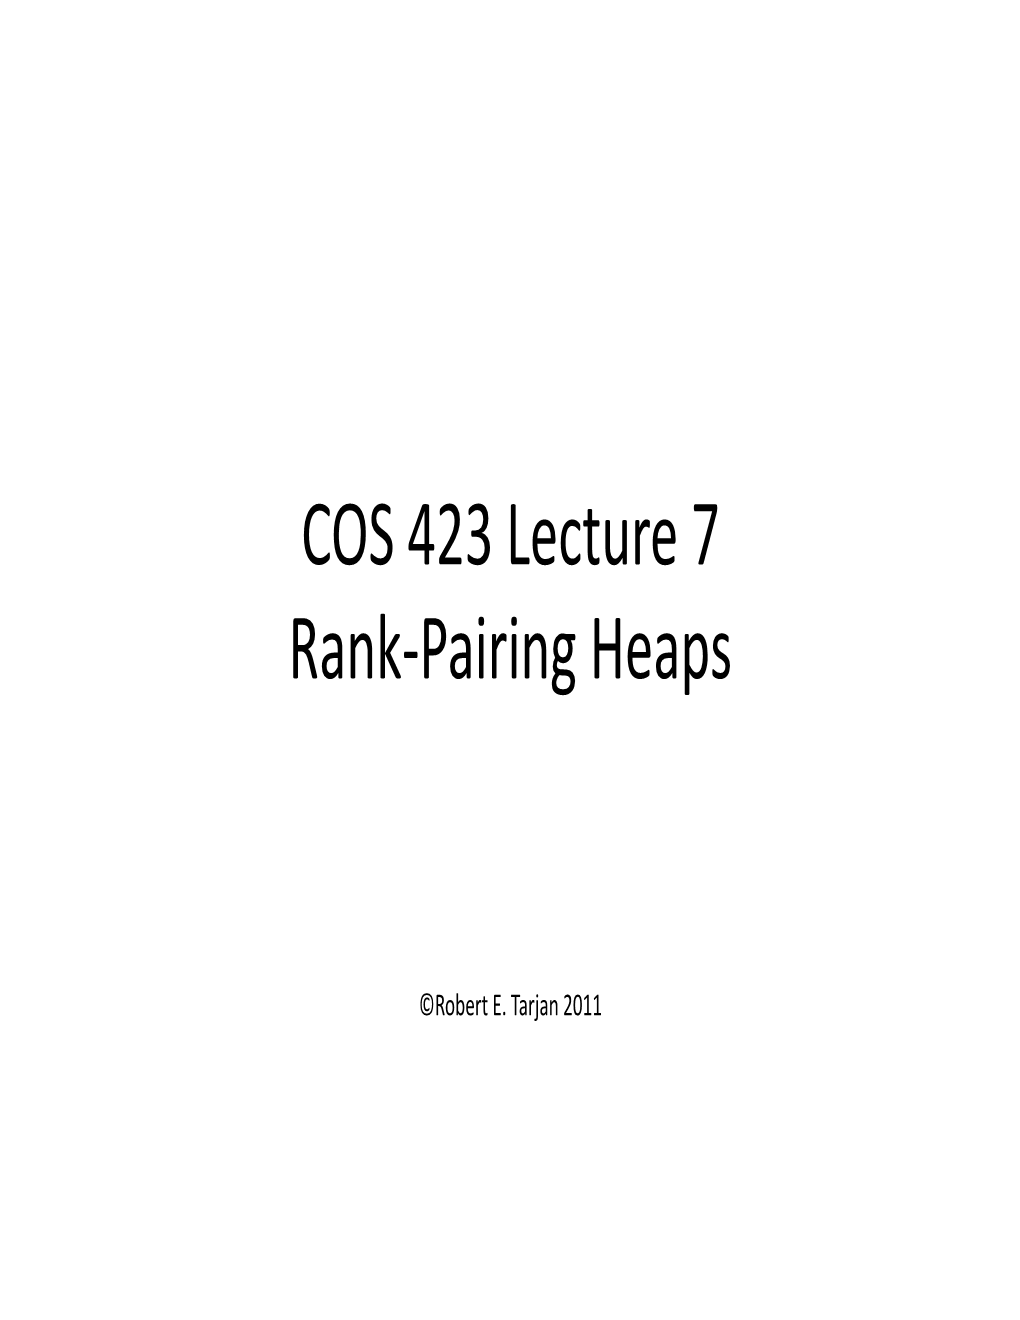 COS 423 Lecture 7 Rank-Pairing Heaps